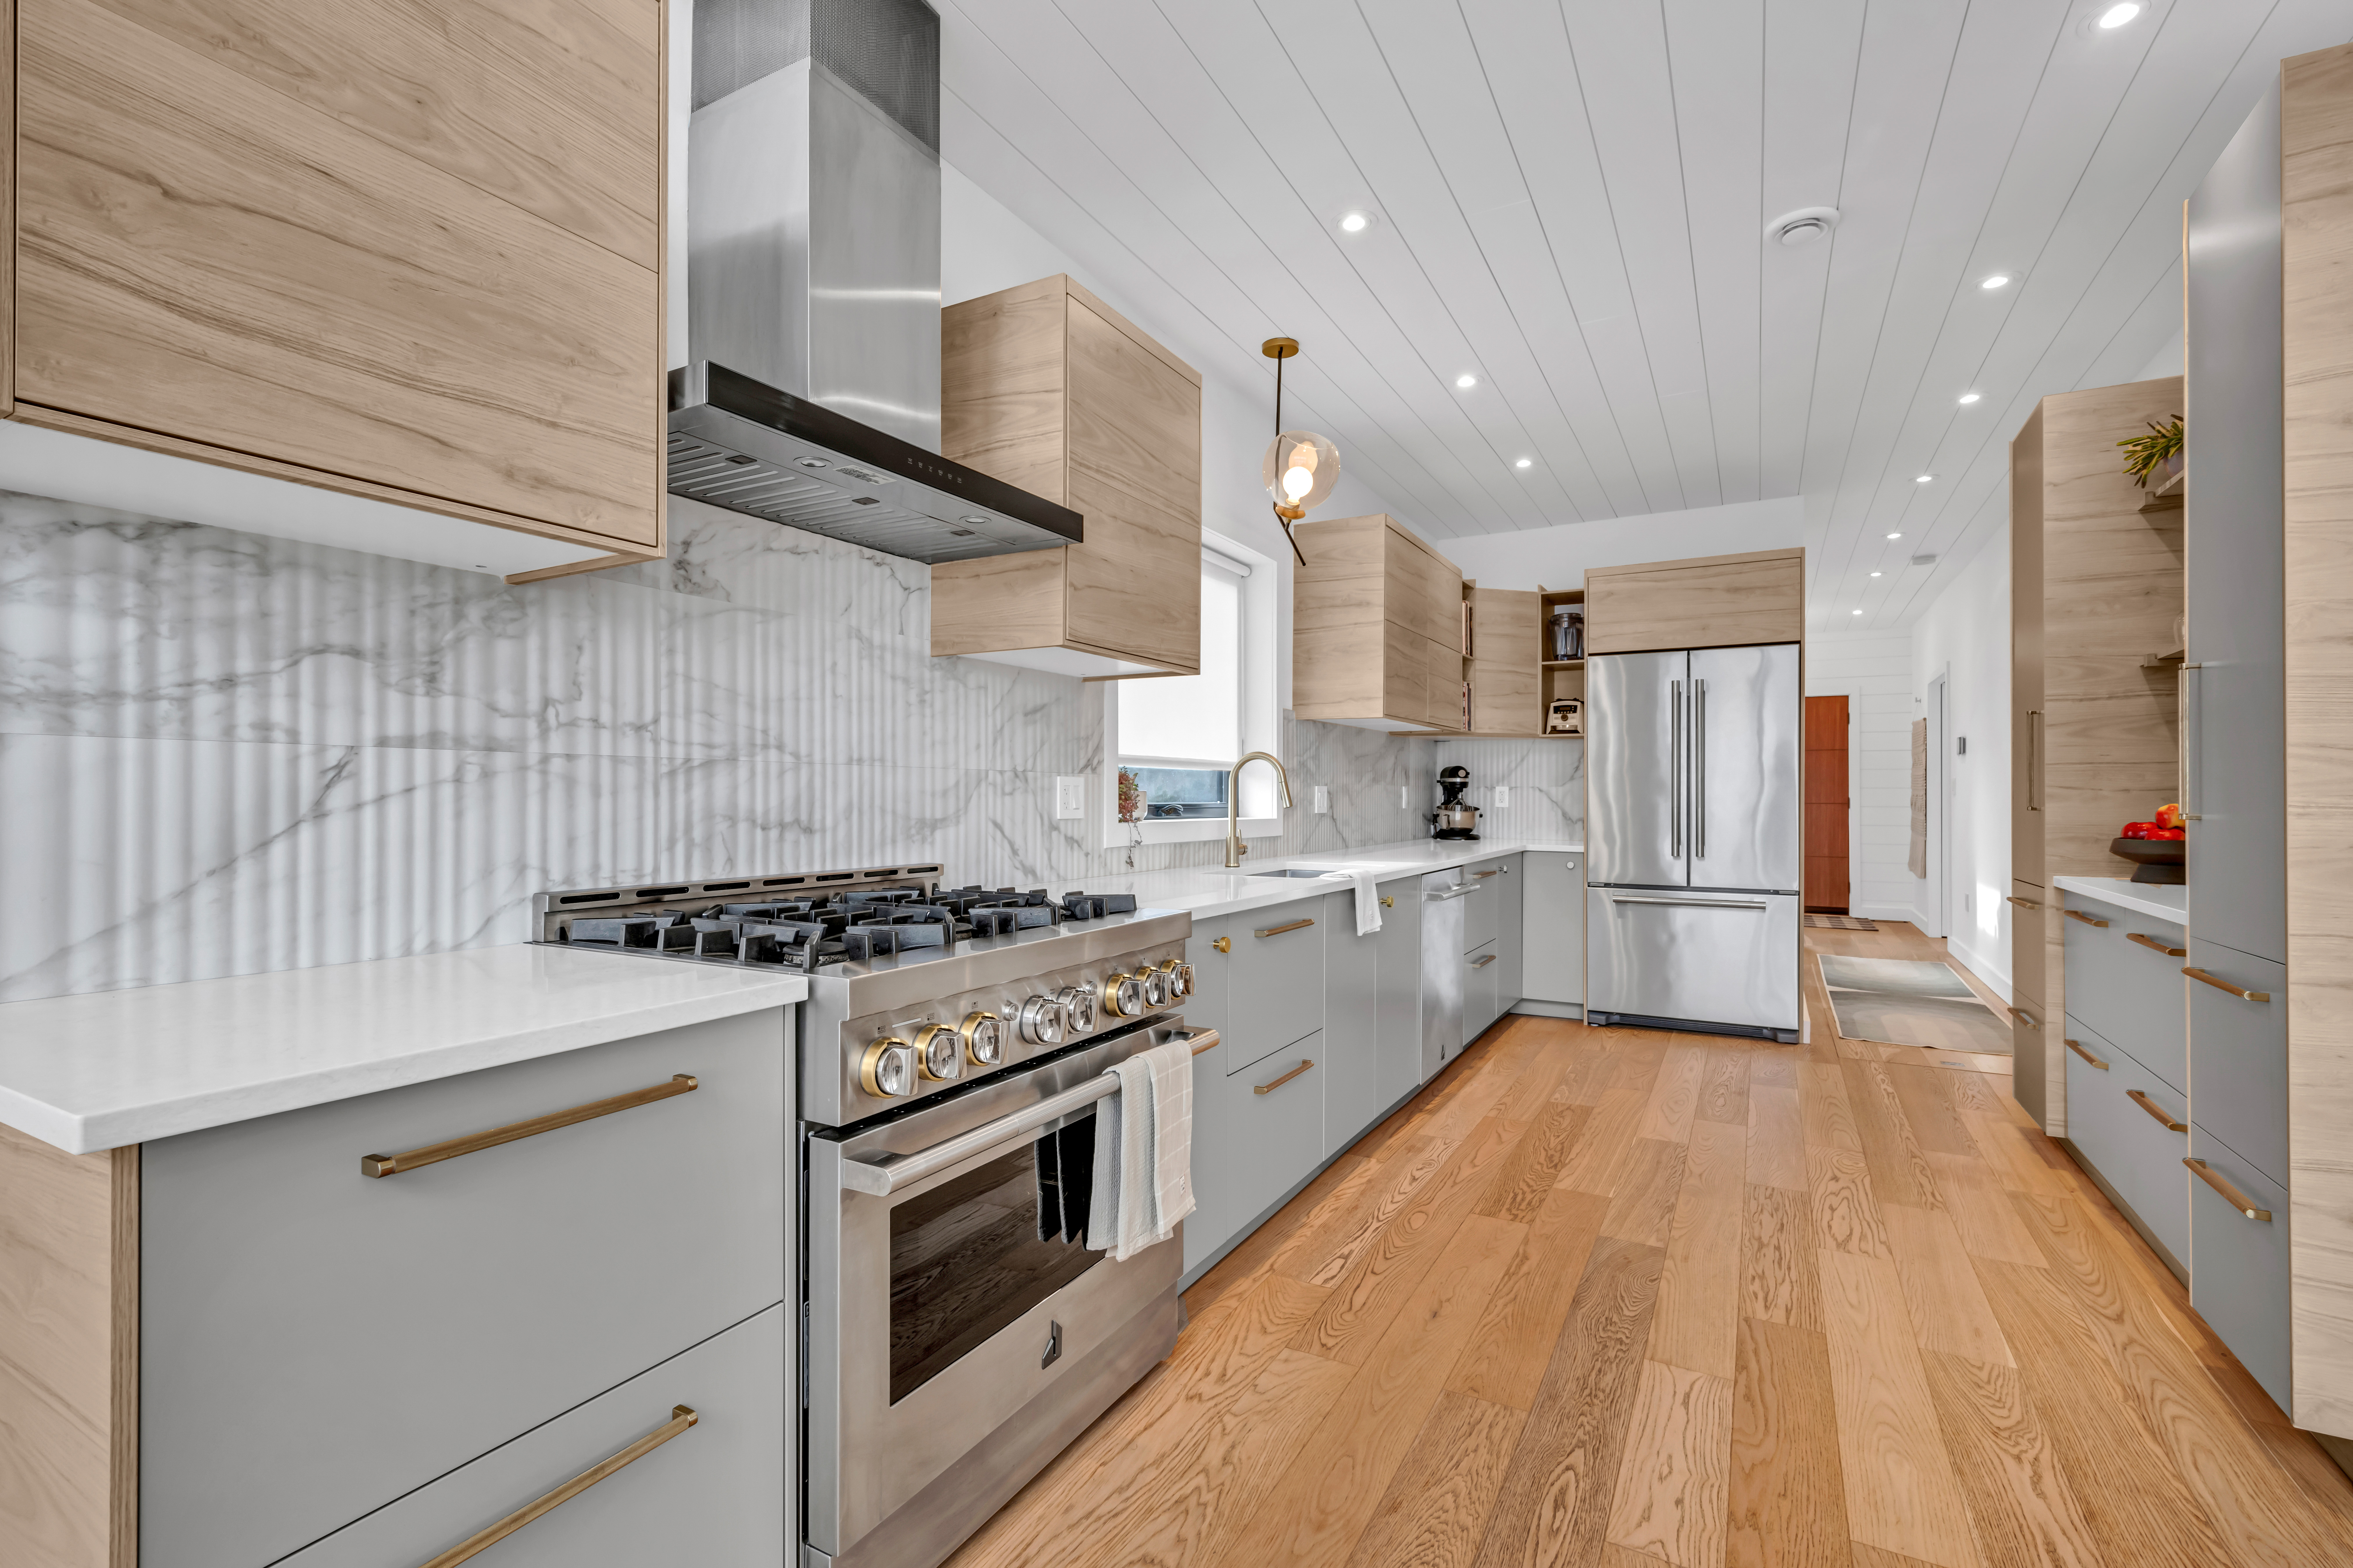 A big, bright, modern kitchen with light gray cabinetry, stainless steel appliances, light hardwood flooring, and lots of countertop space.